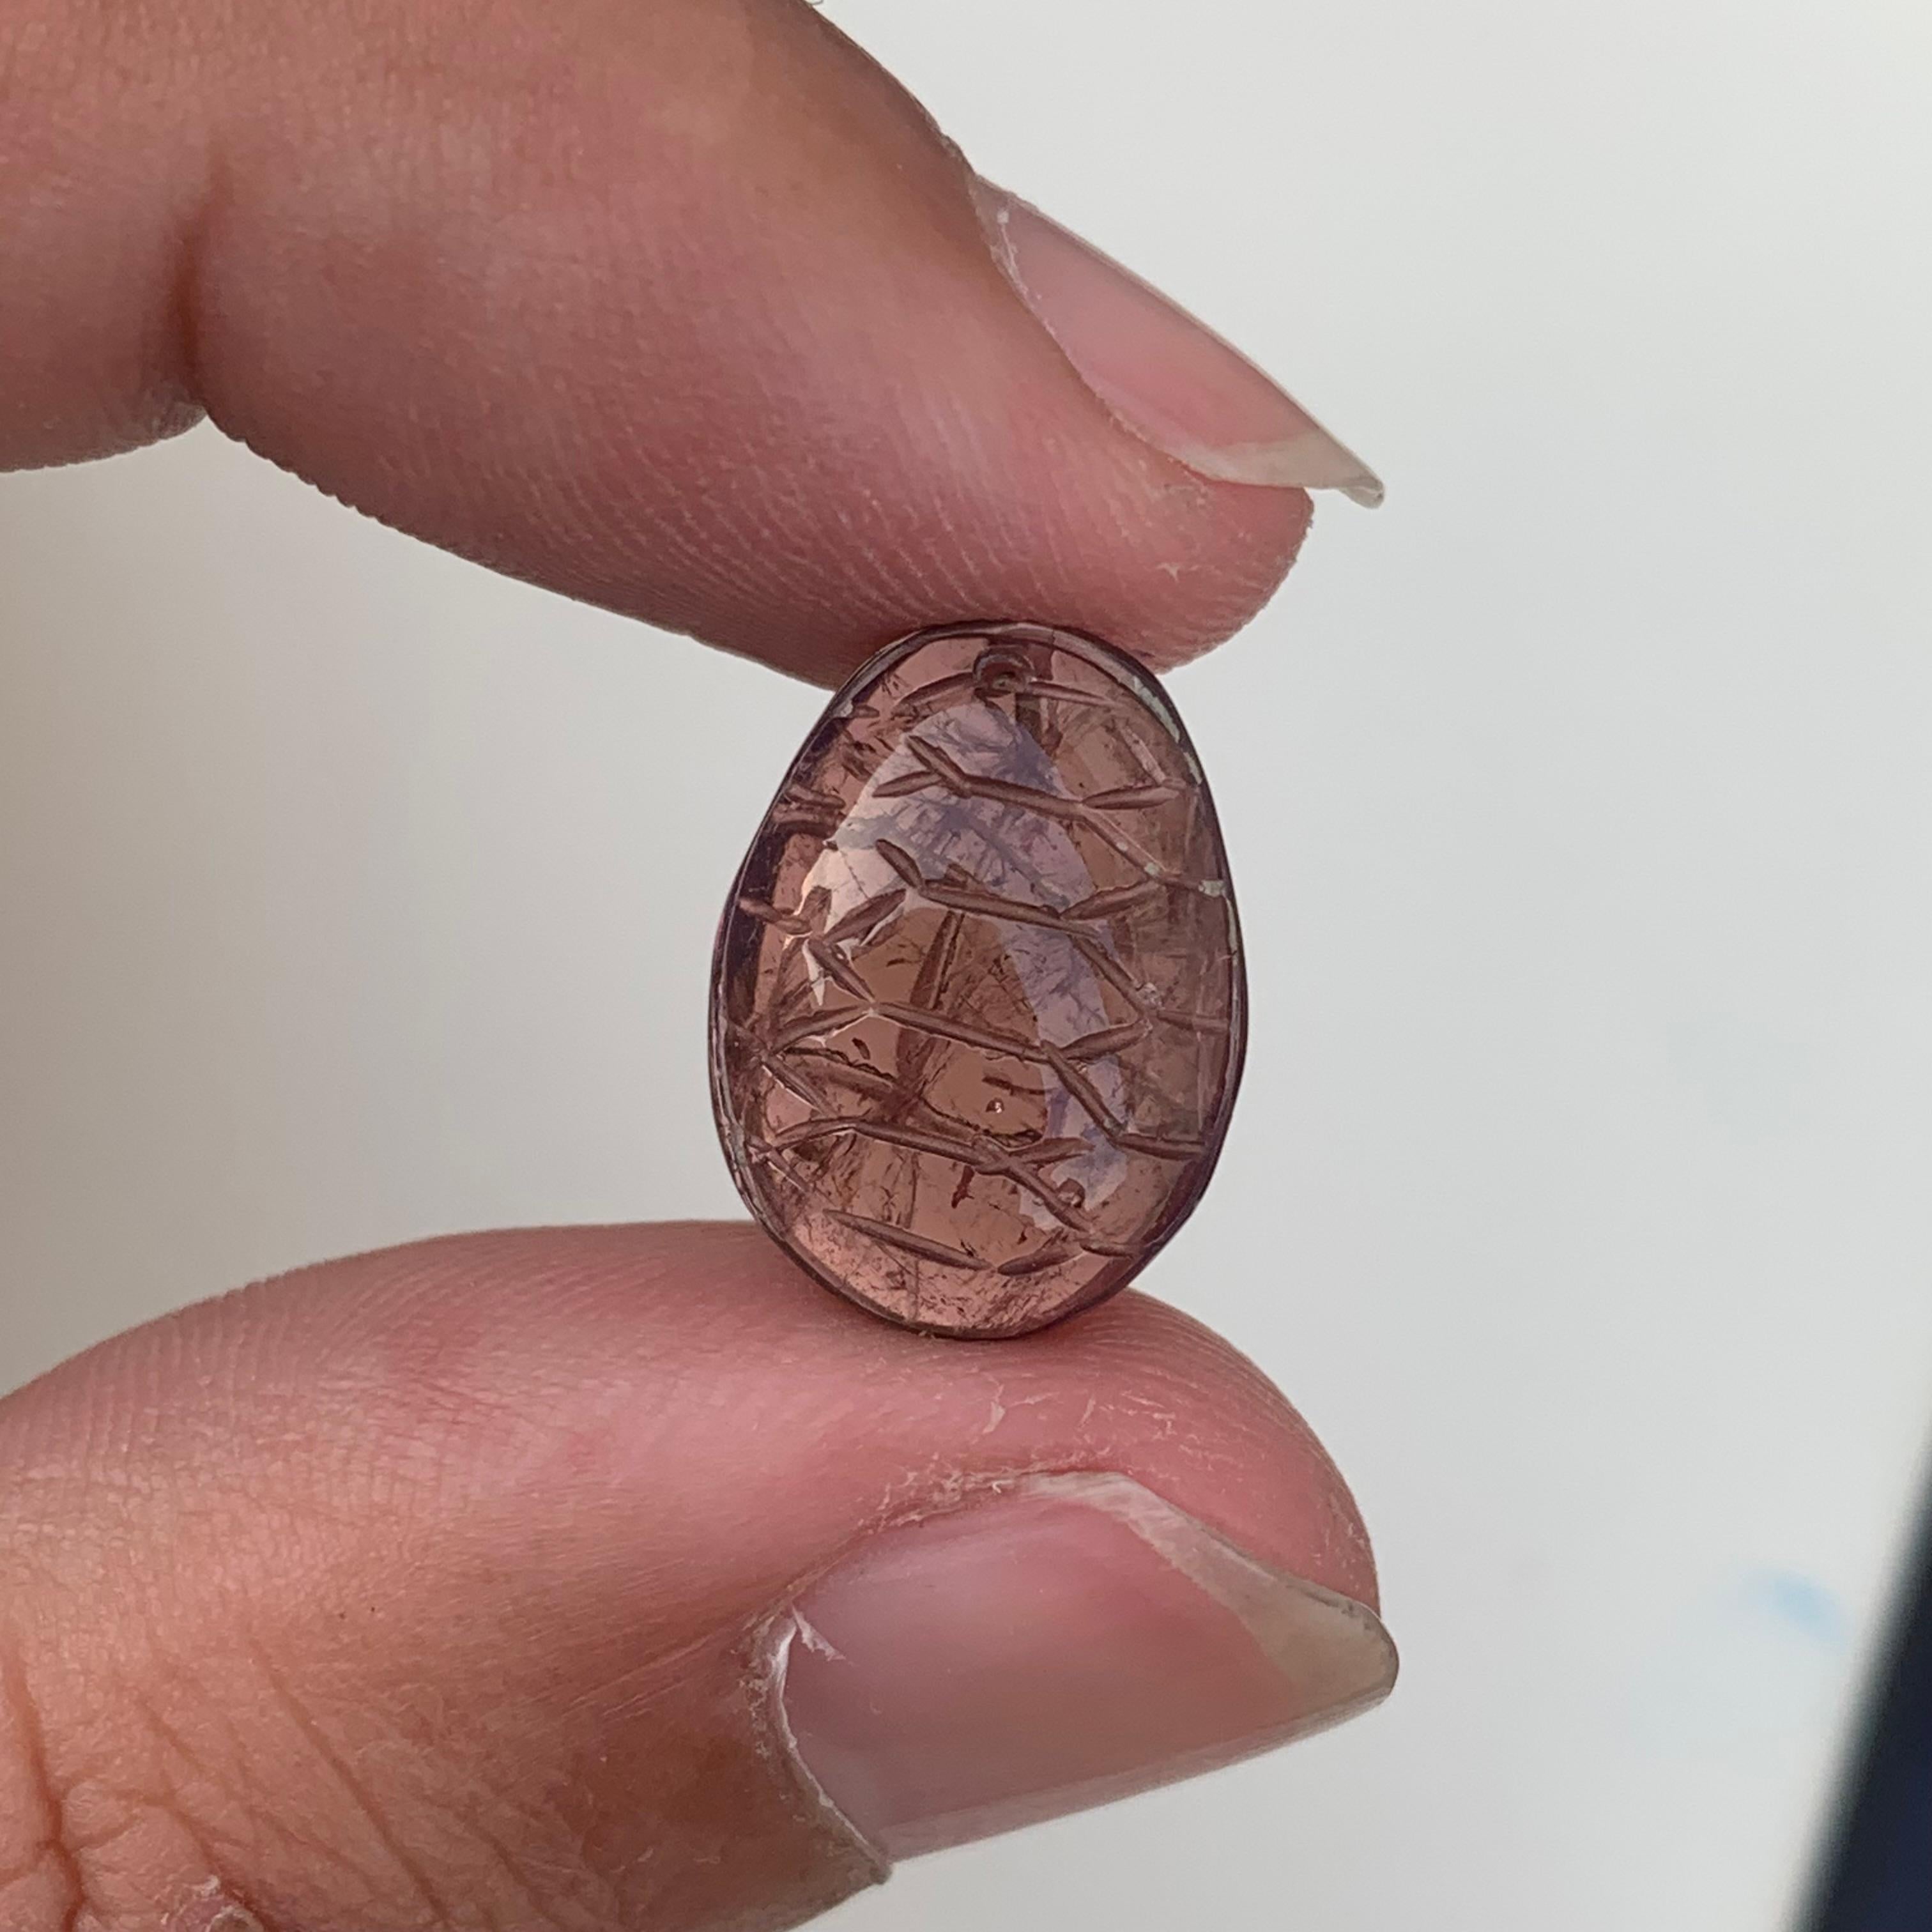 Lovely Loose Peach Color Tourmaline Carving From Madagascar Africa
WEIGHT: 7.90 Carat
DIMENSIONS : 1.6 x 1.1 0.5 Cm
ORIGIN: Madagascar, Africa
Color: Peach 

Tourmaline is an extremely popular gemstone; the name Tourmaline is derived from